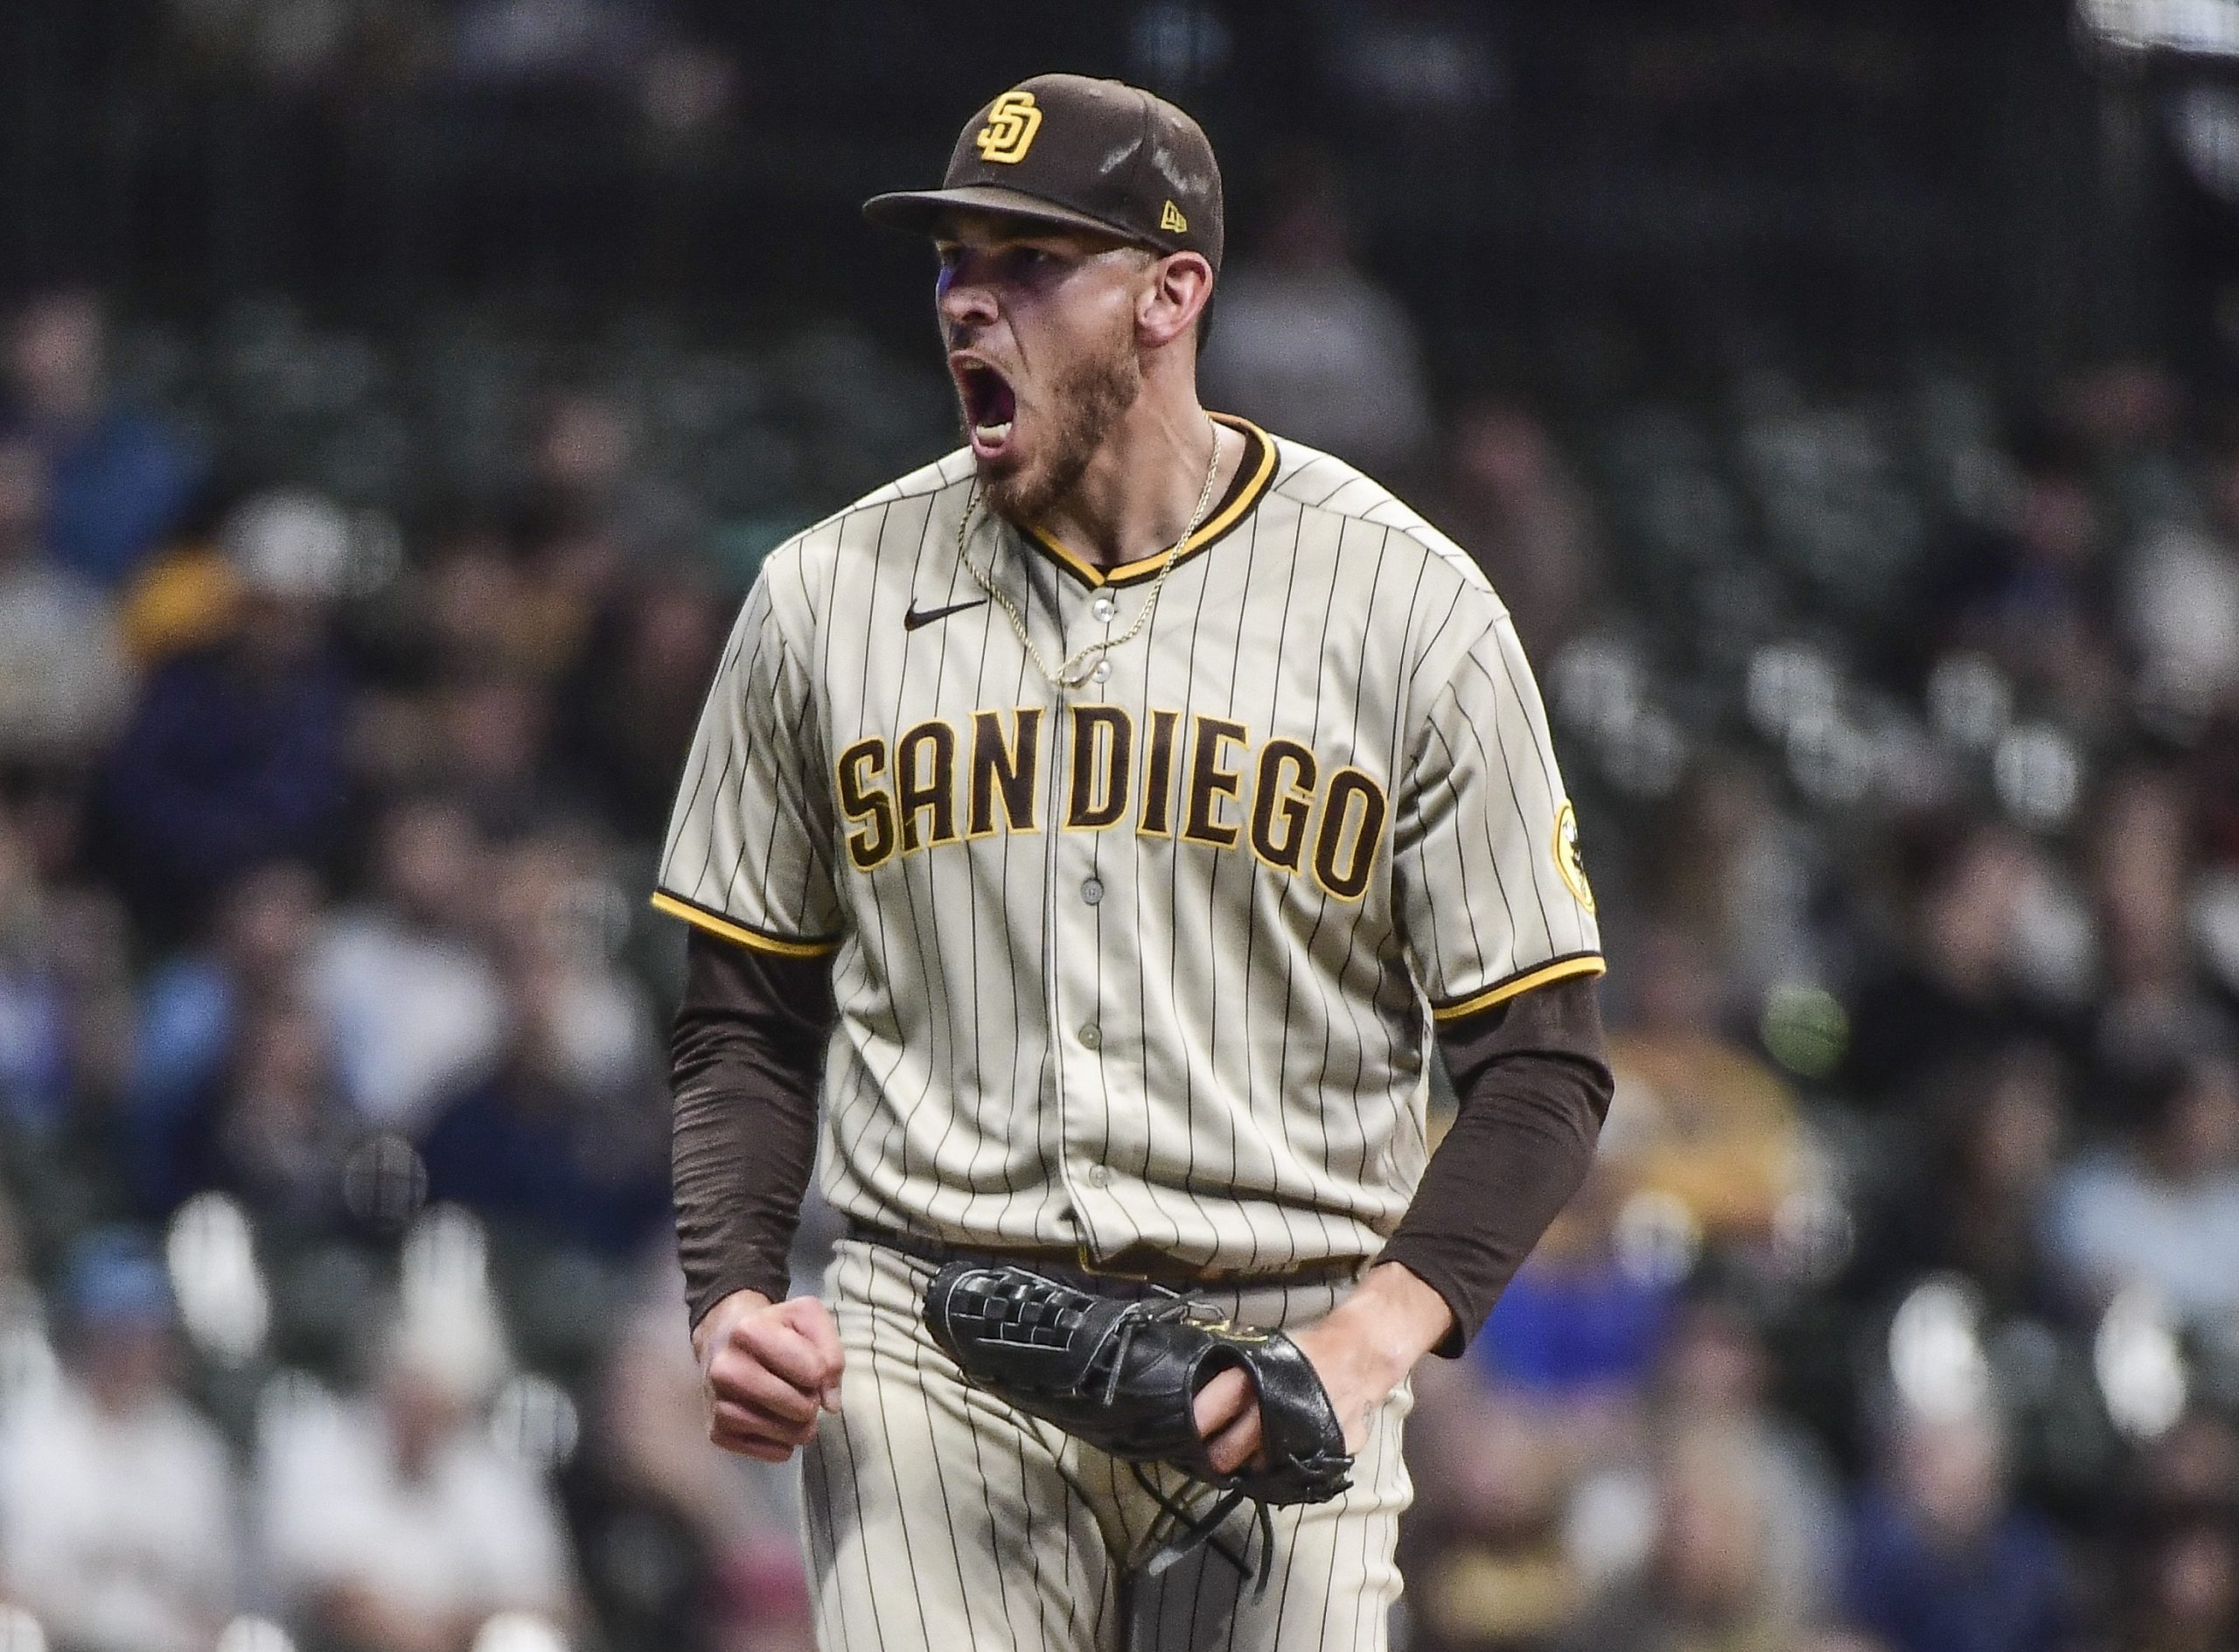 Jun 3, 2022; Milwaukee, Wisconsin, USA; San Diego Padres pitcher Joe Musgrove (44) reacts after striking out Milwaukee Brewers third baseman Jace Peterson (not pictured) in the seventh inning at American Family Field. Mandatory Credit: Benny Sieu-USA TODAY Sports